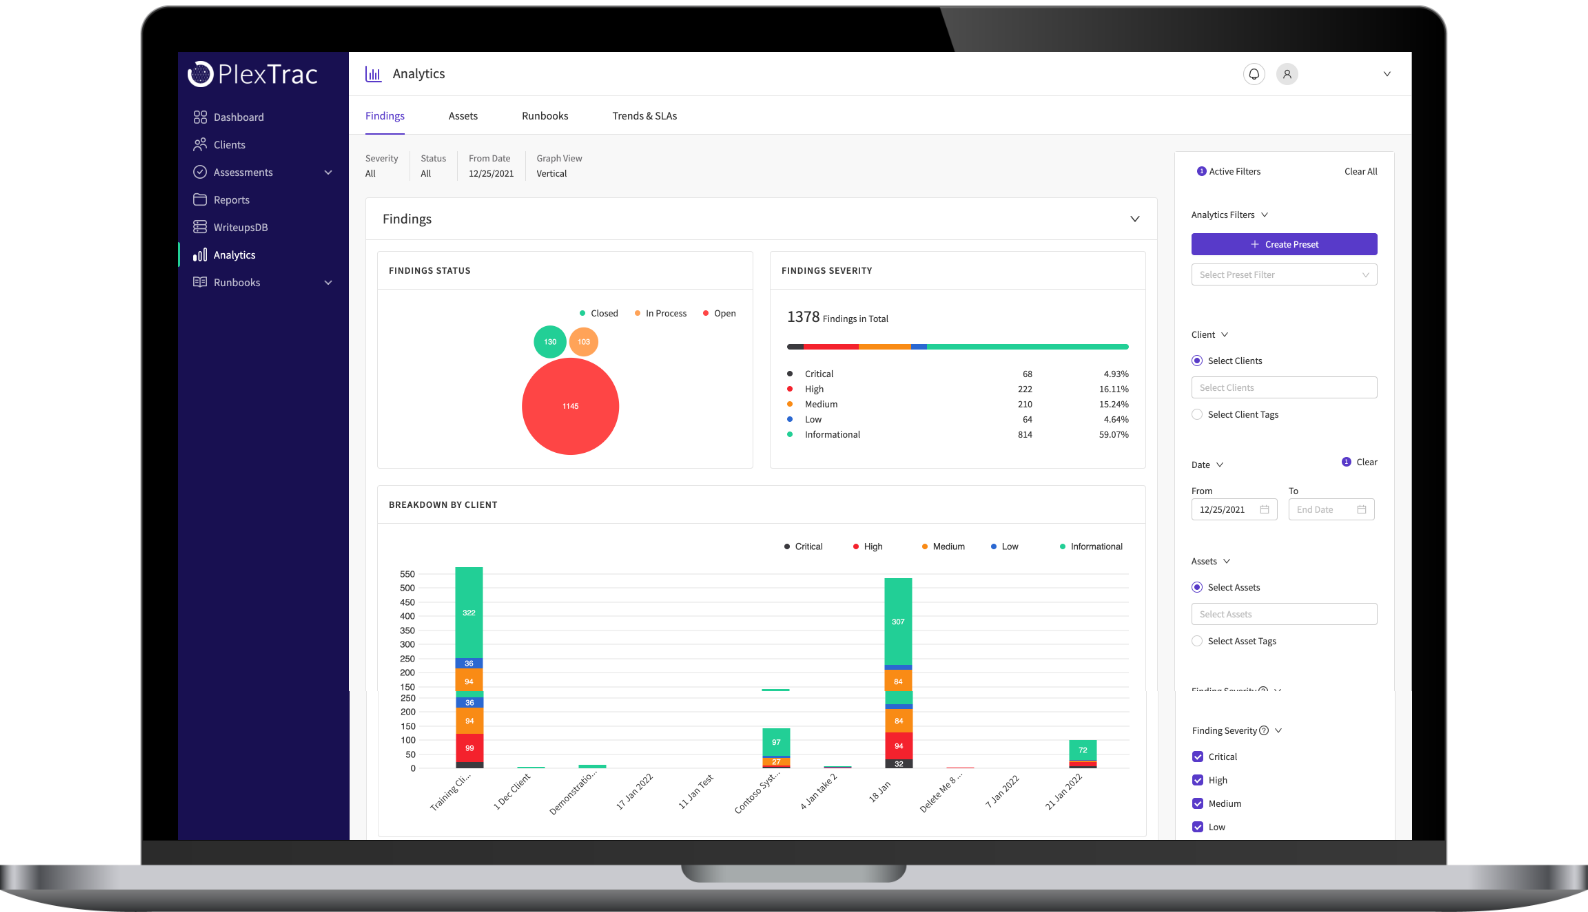 Use PlexTrac's Analytics module to highlight your strengths and empower you to improve your weaknesses